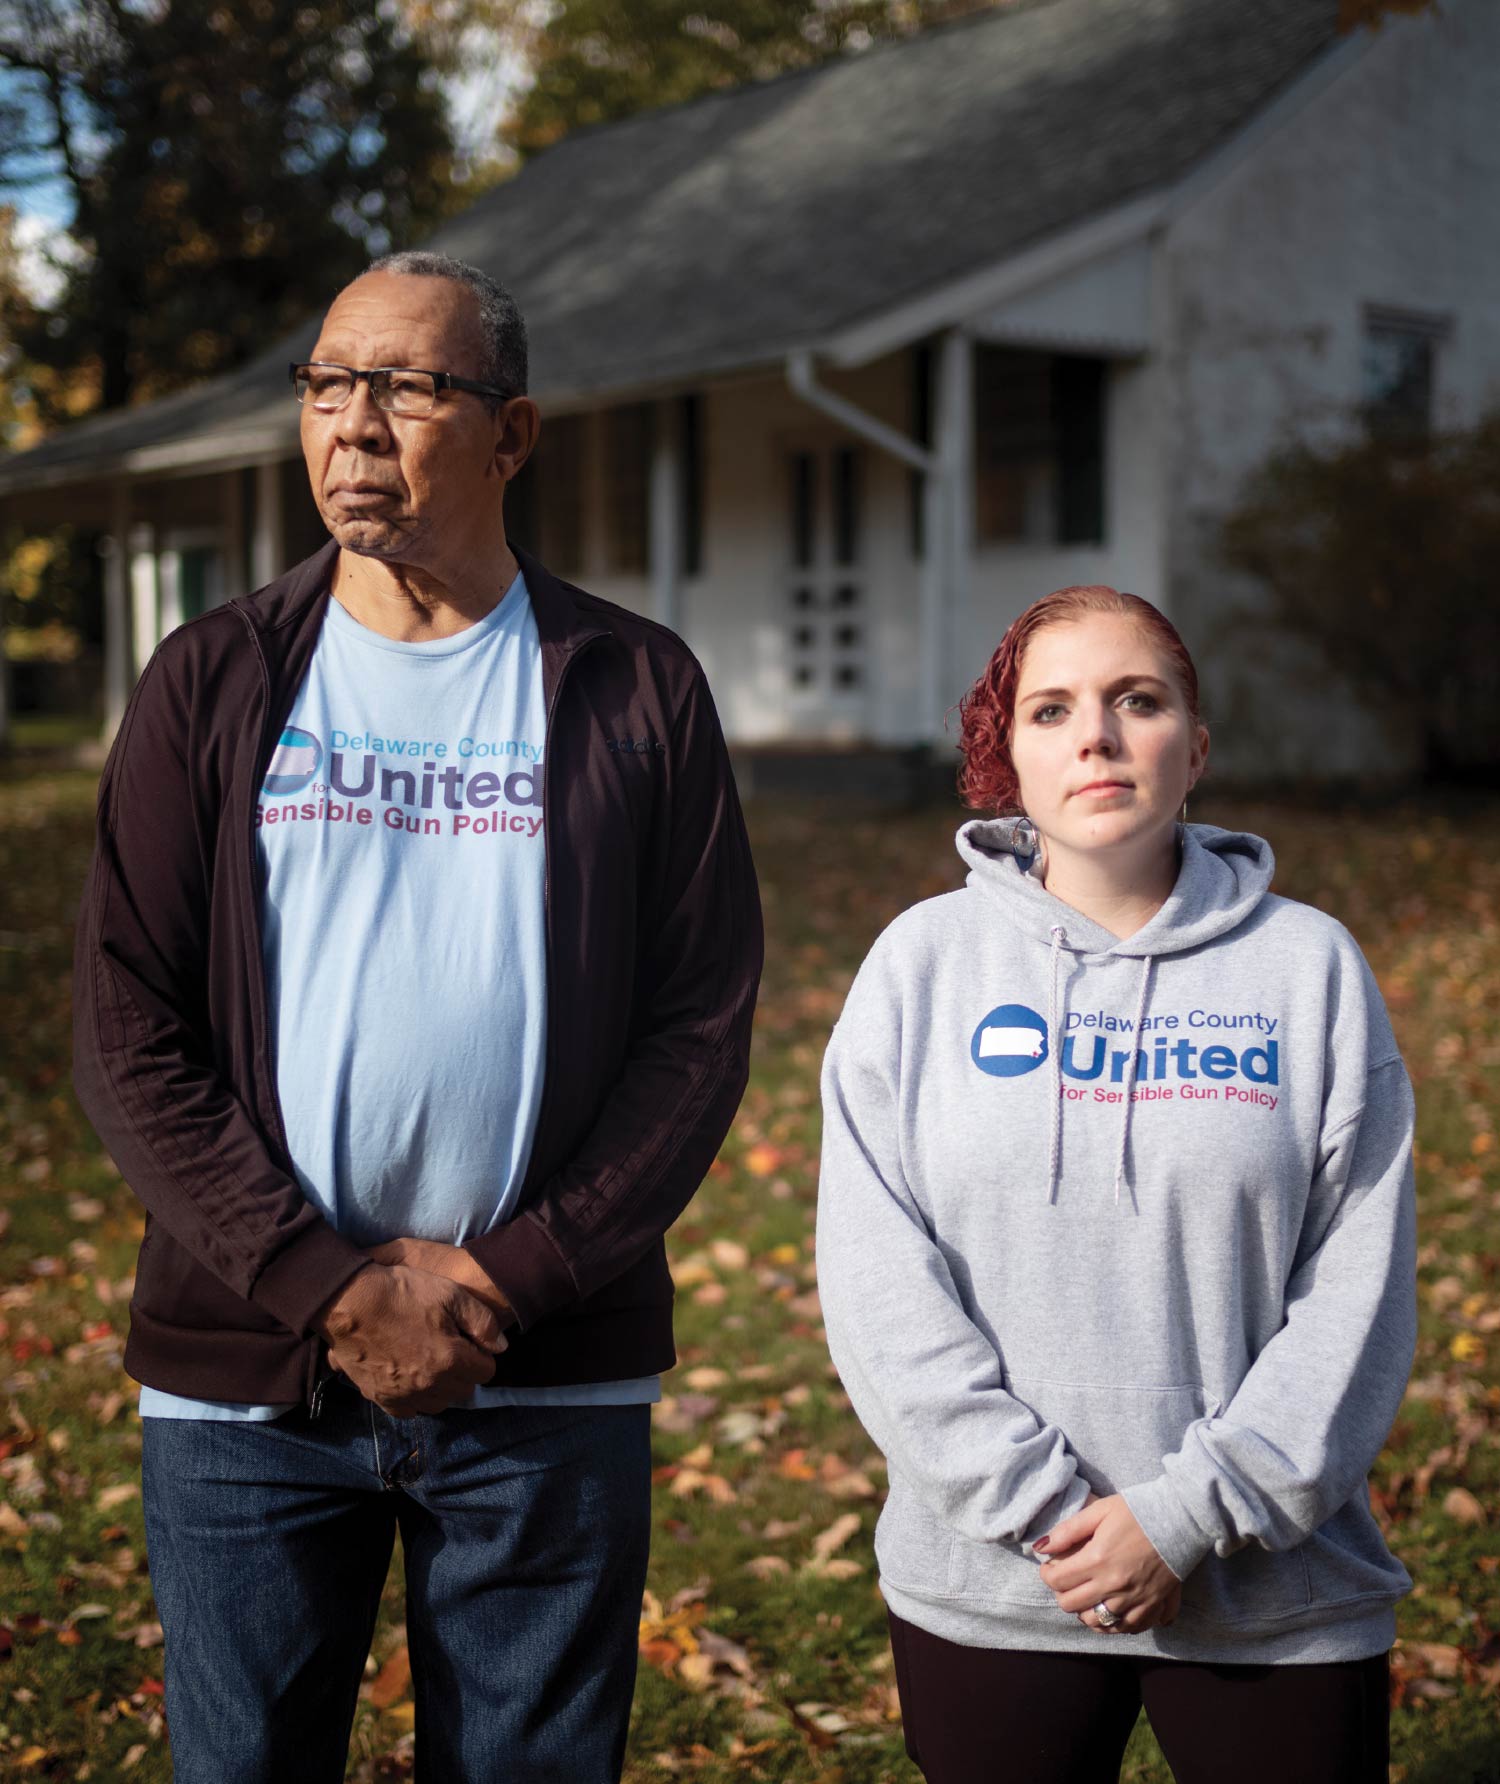 John Linder and Jess Frankl, wearing stoic looks and attire featuring the logo for Delaware County United for Sensible Gun Policy. They stand outside a Quaker meetinghouse with leave on the ground.